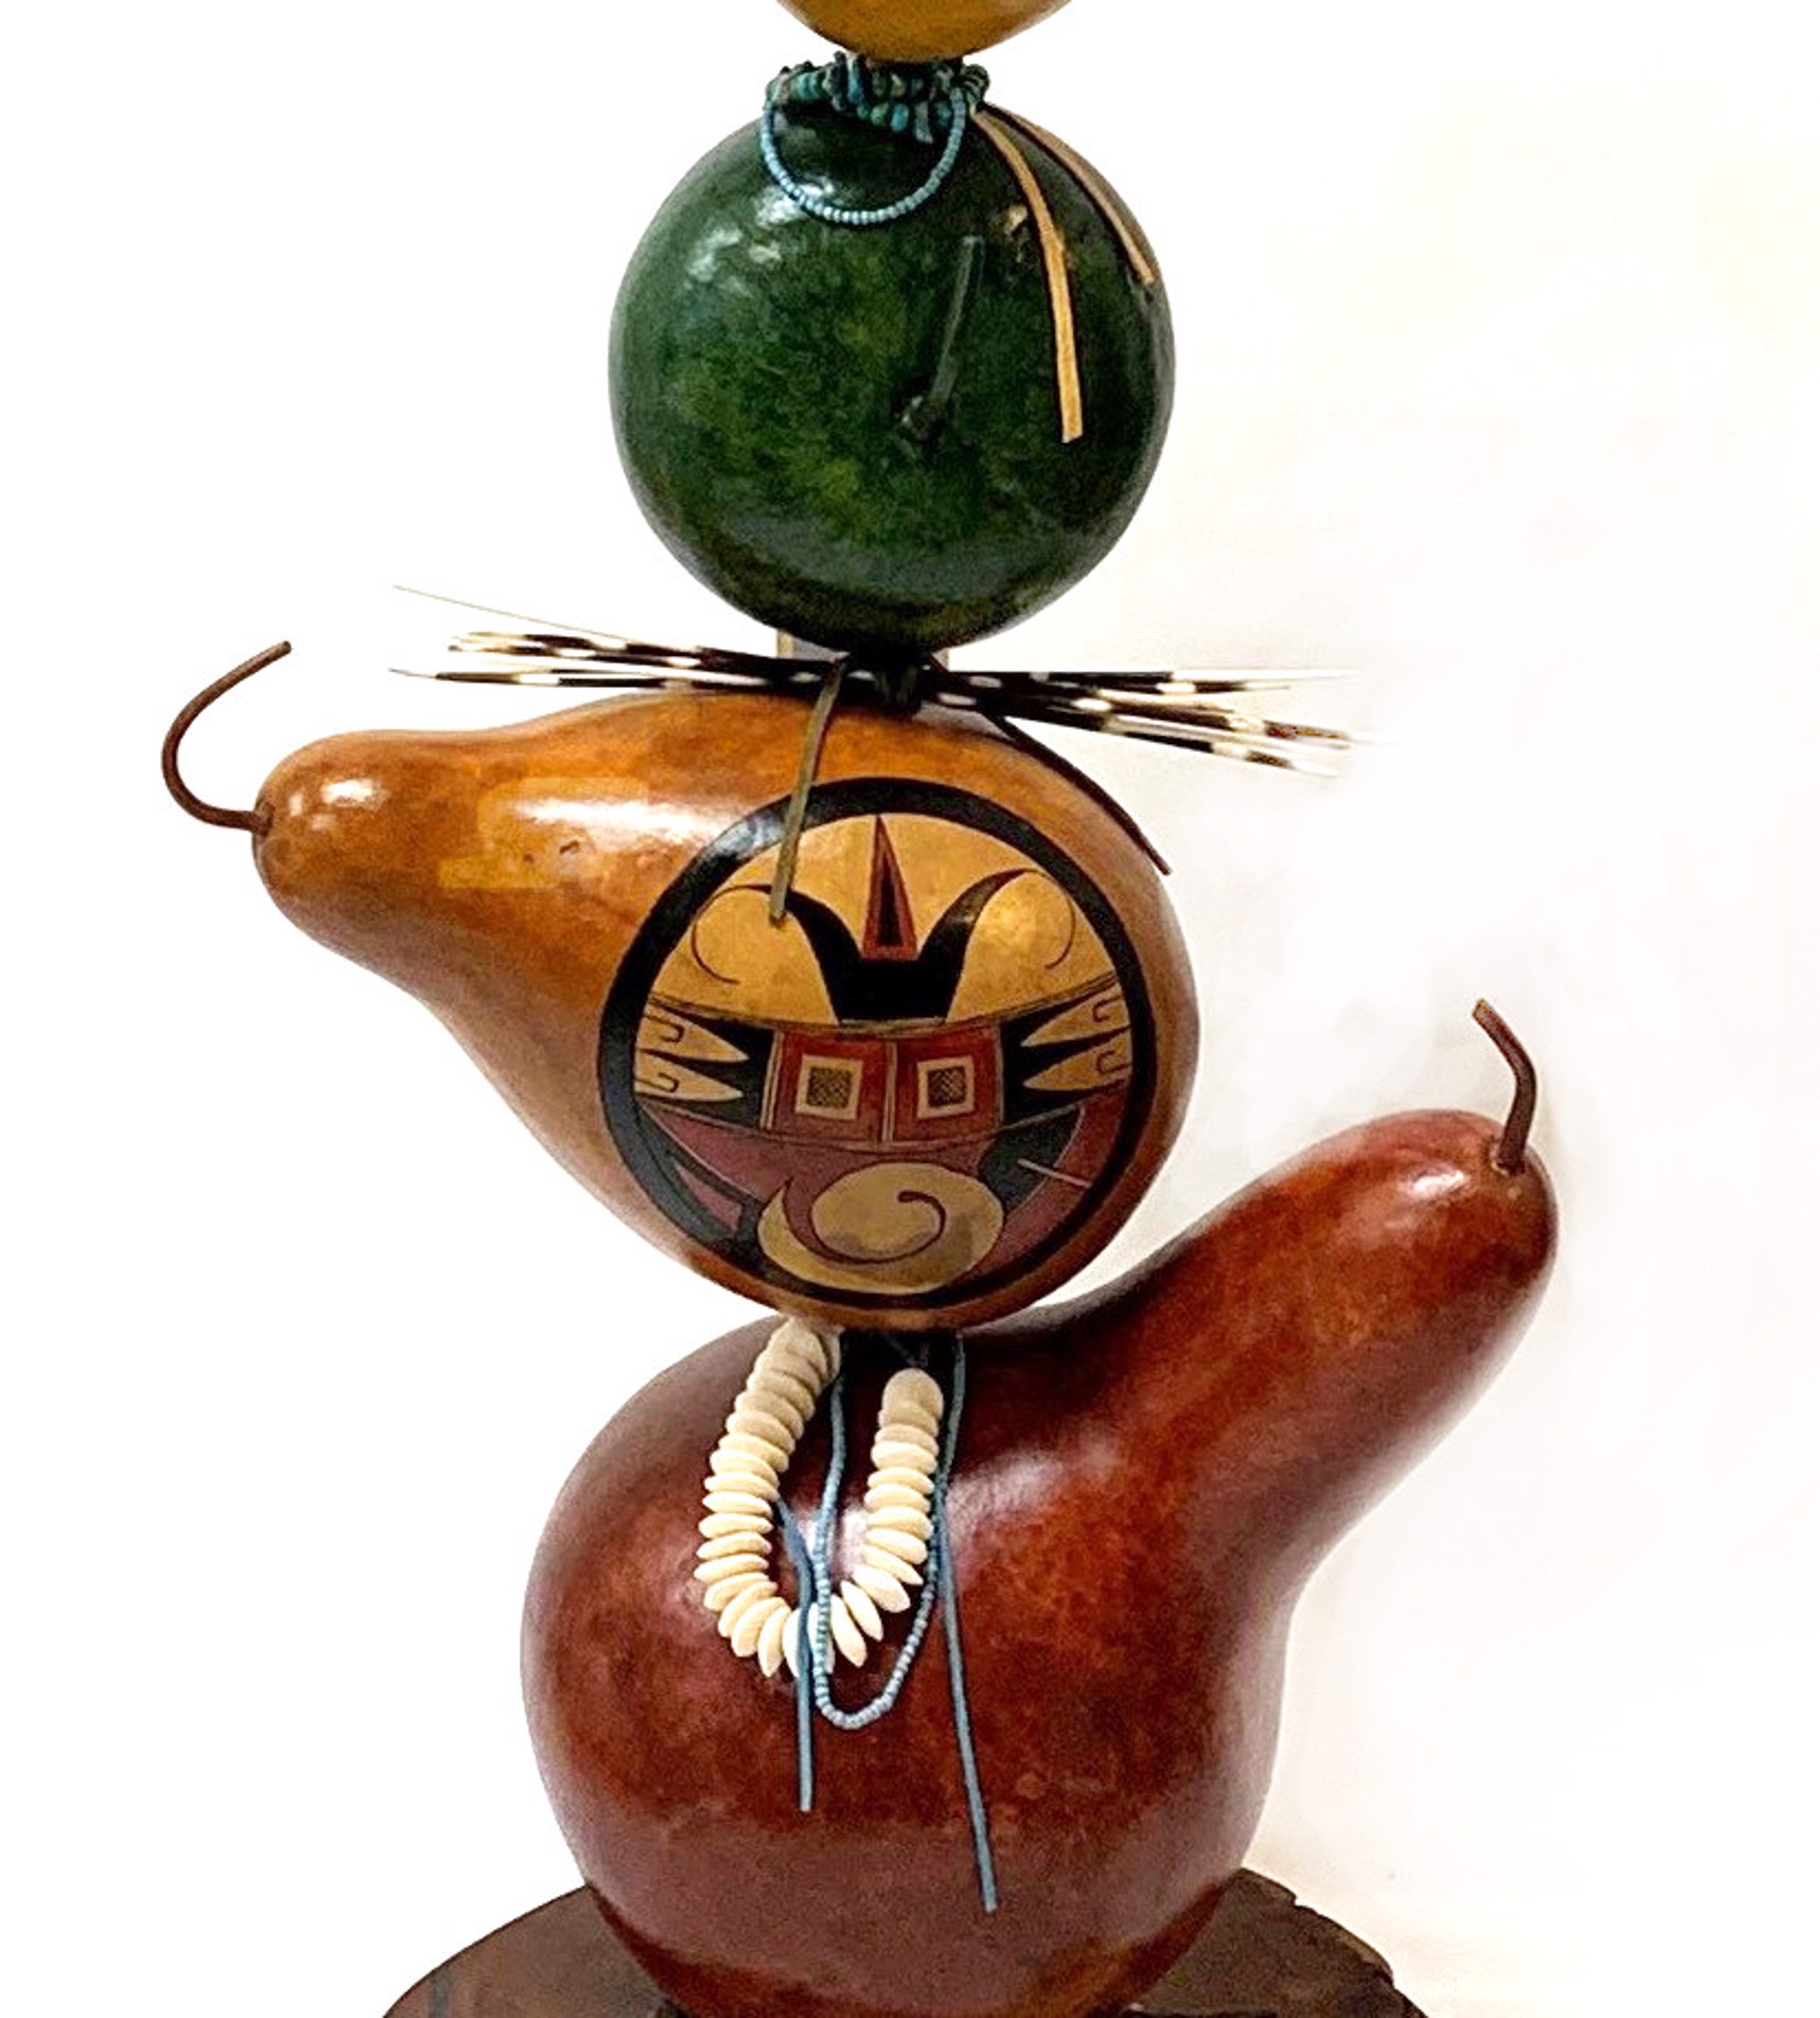 Quail Gourd Totem with Beads, Leather, Porcupine Quills by Gary & Glenis Leitch